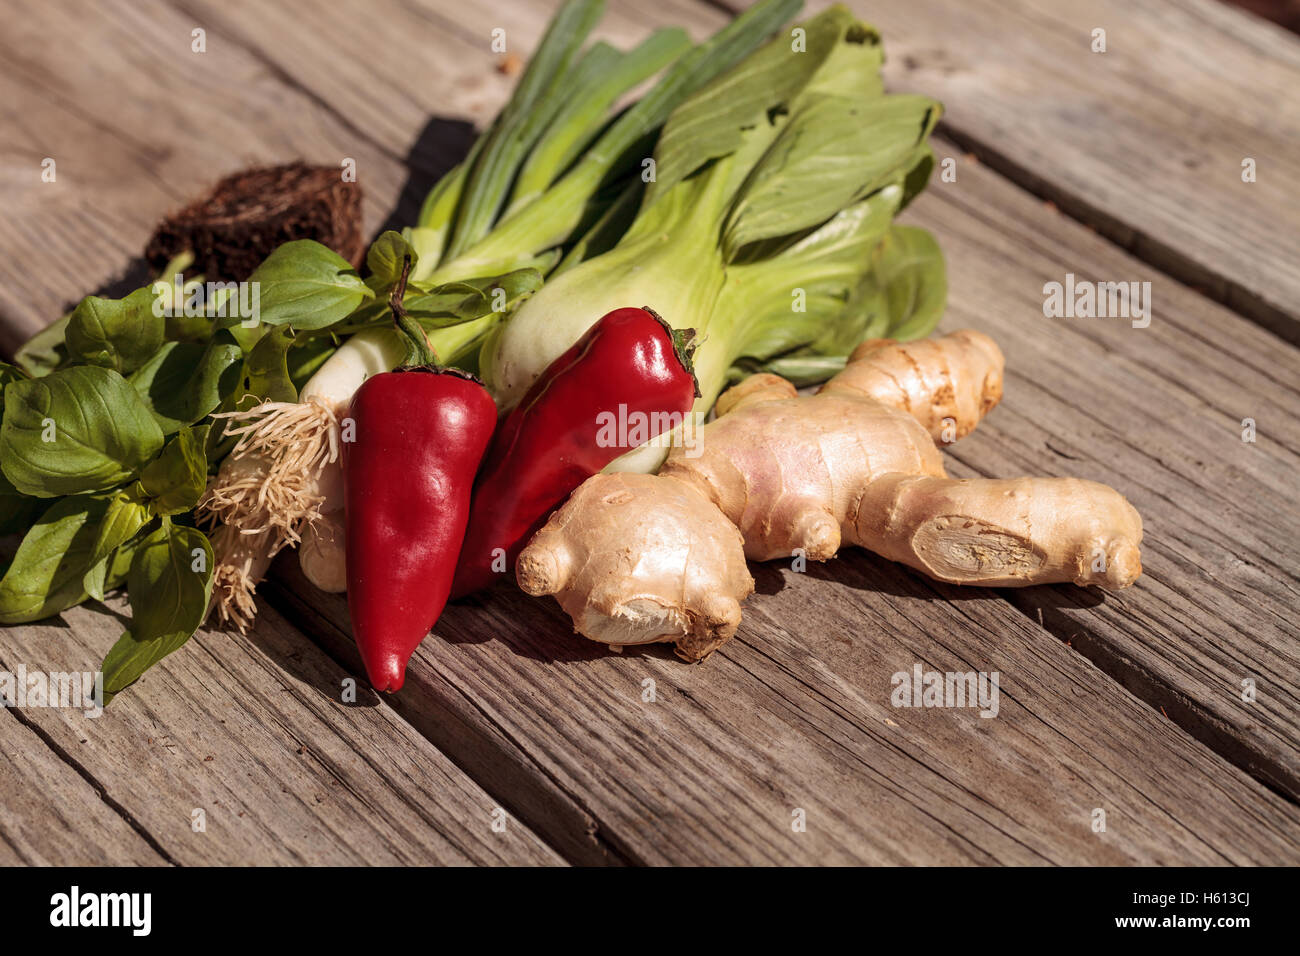 Organic basil spice, red jalapeno pepper, green Chinese bok choy, green onion and ginger on a rustic wood farm table. Stock Photo